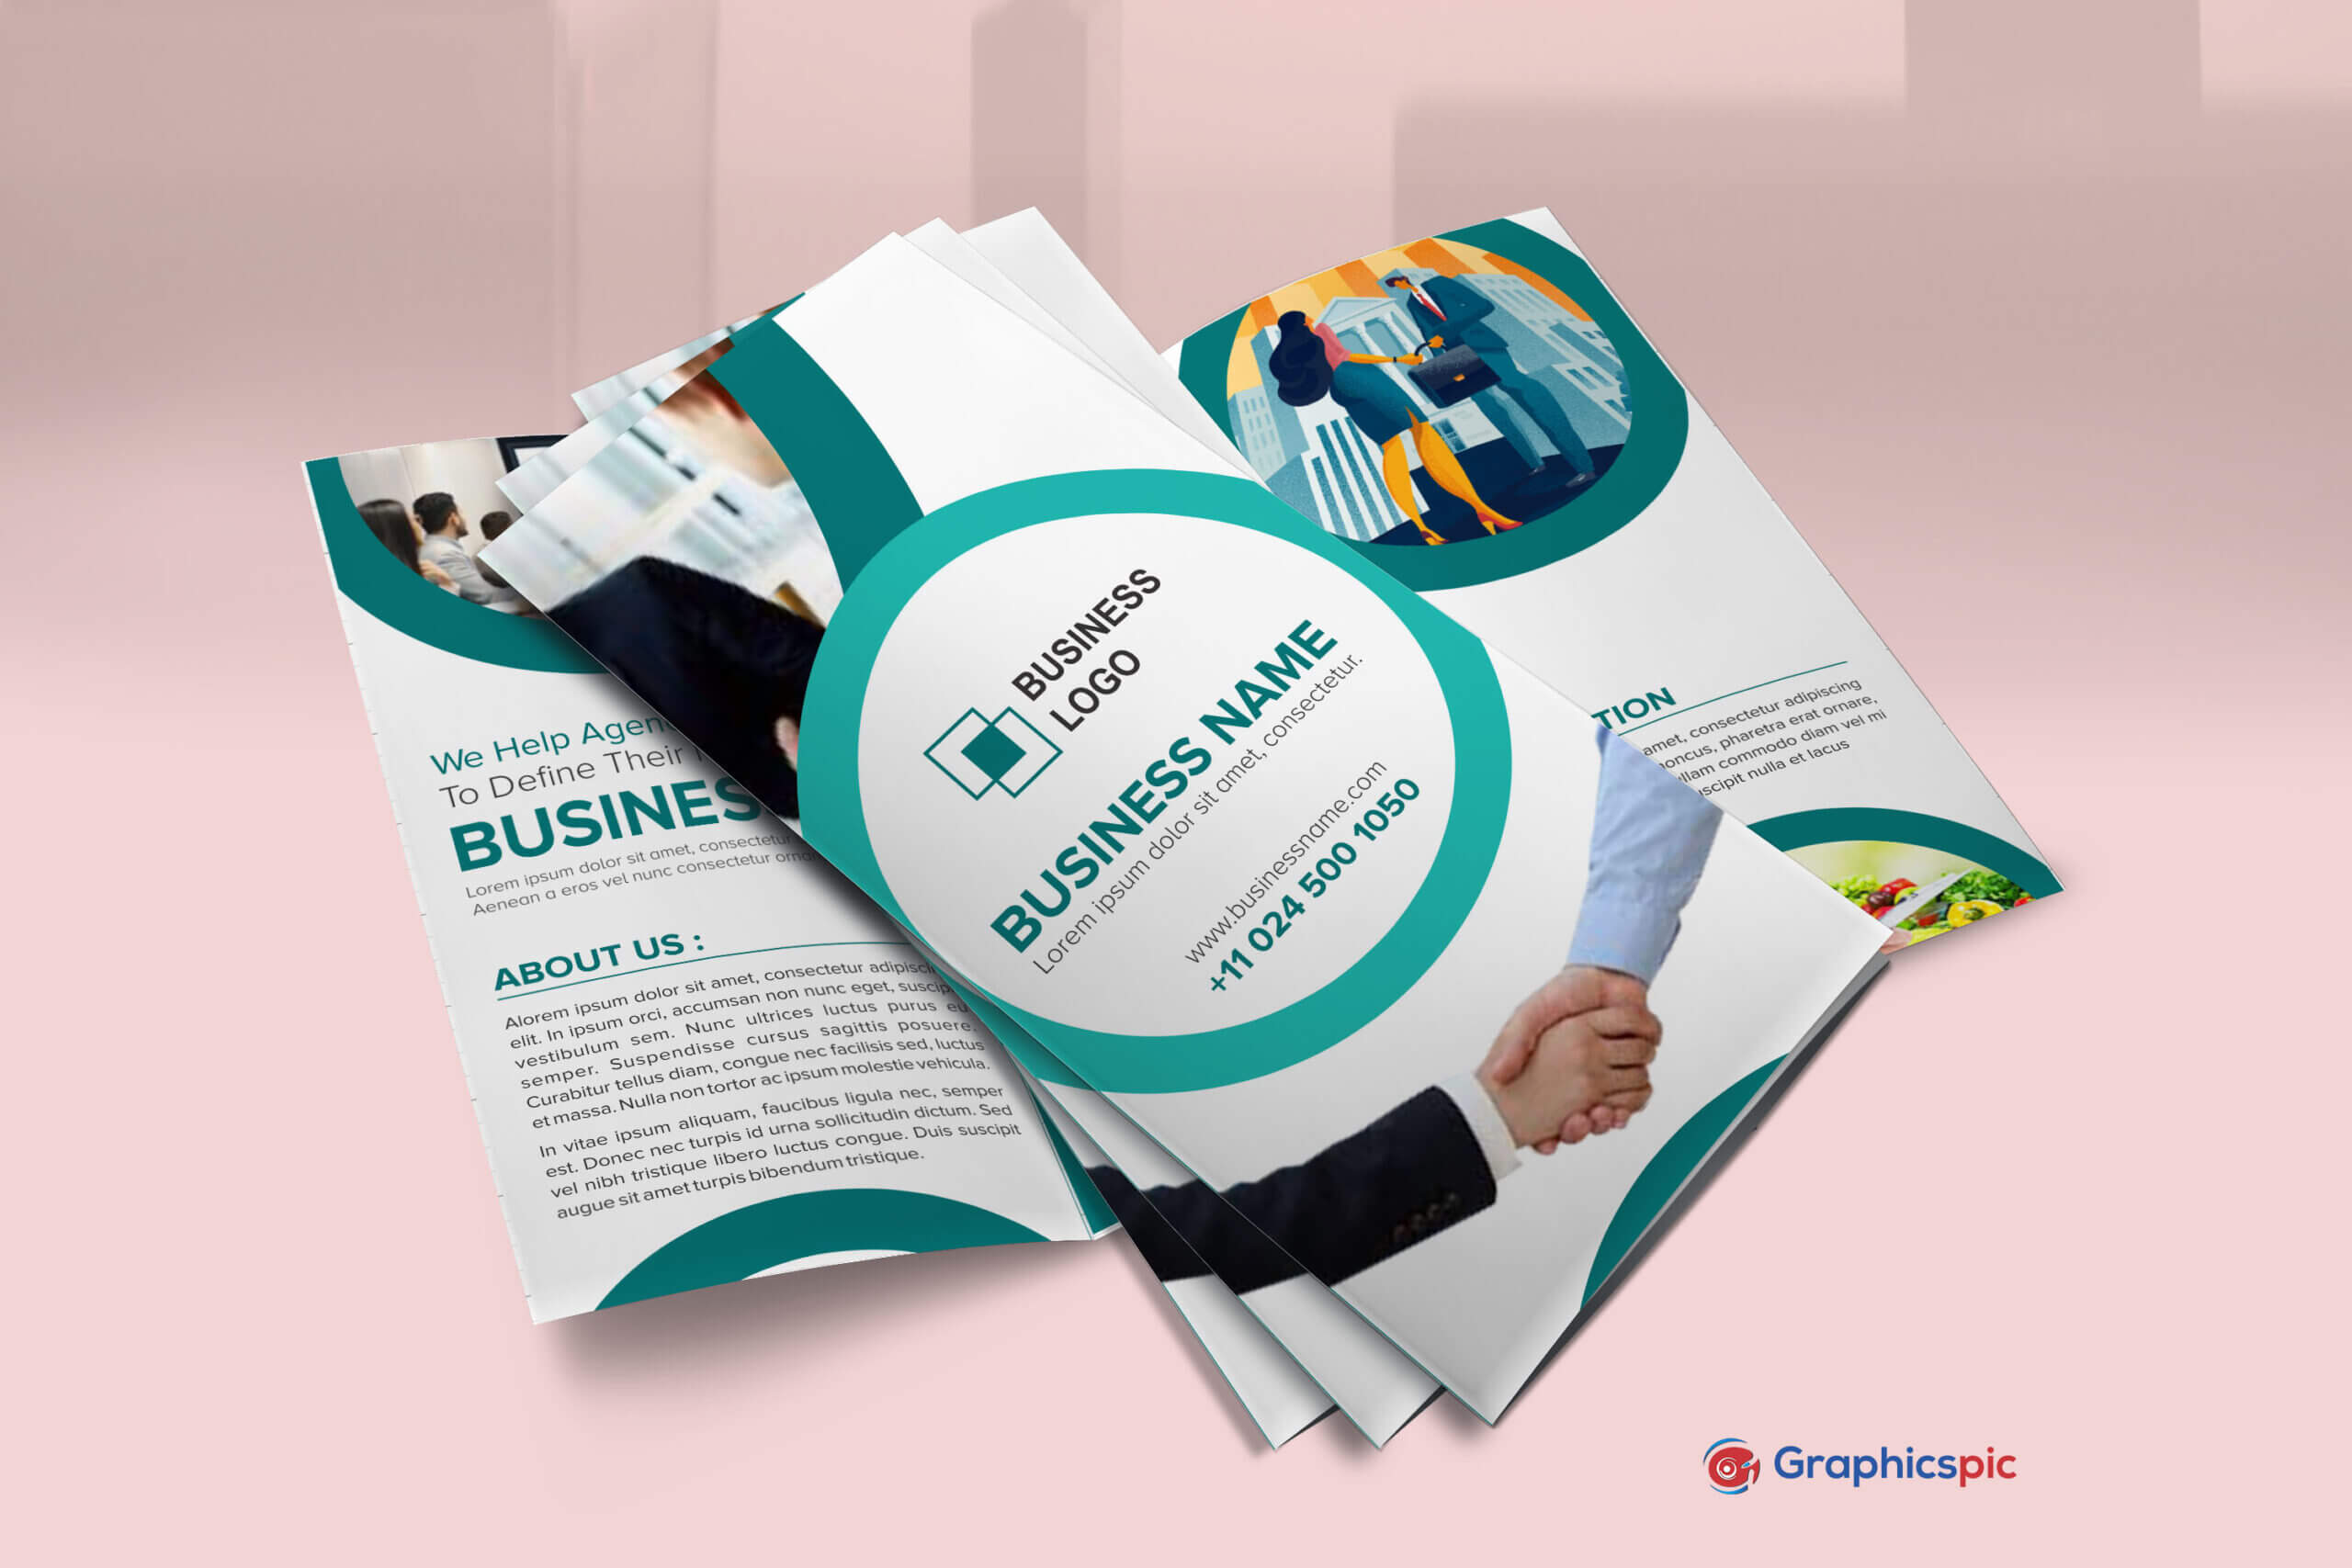 Free Download Brochure Templates Design For Events, Products Throughout Product Brochure Template Free